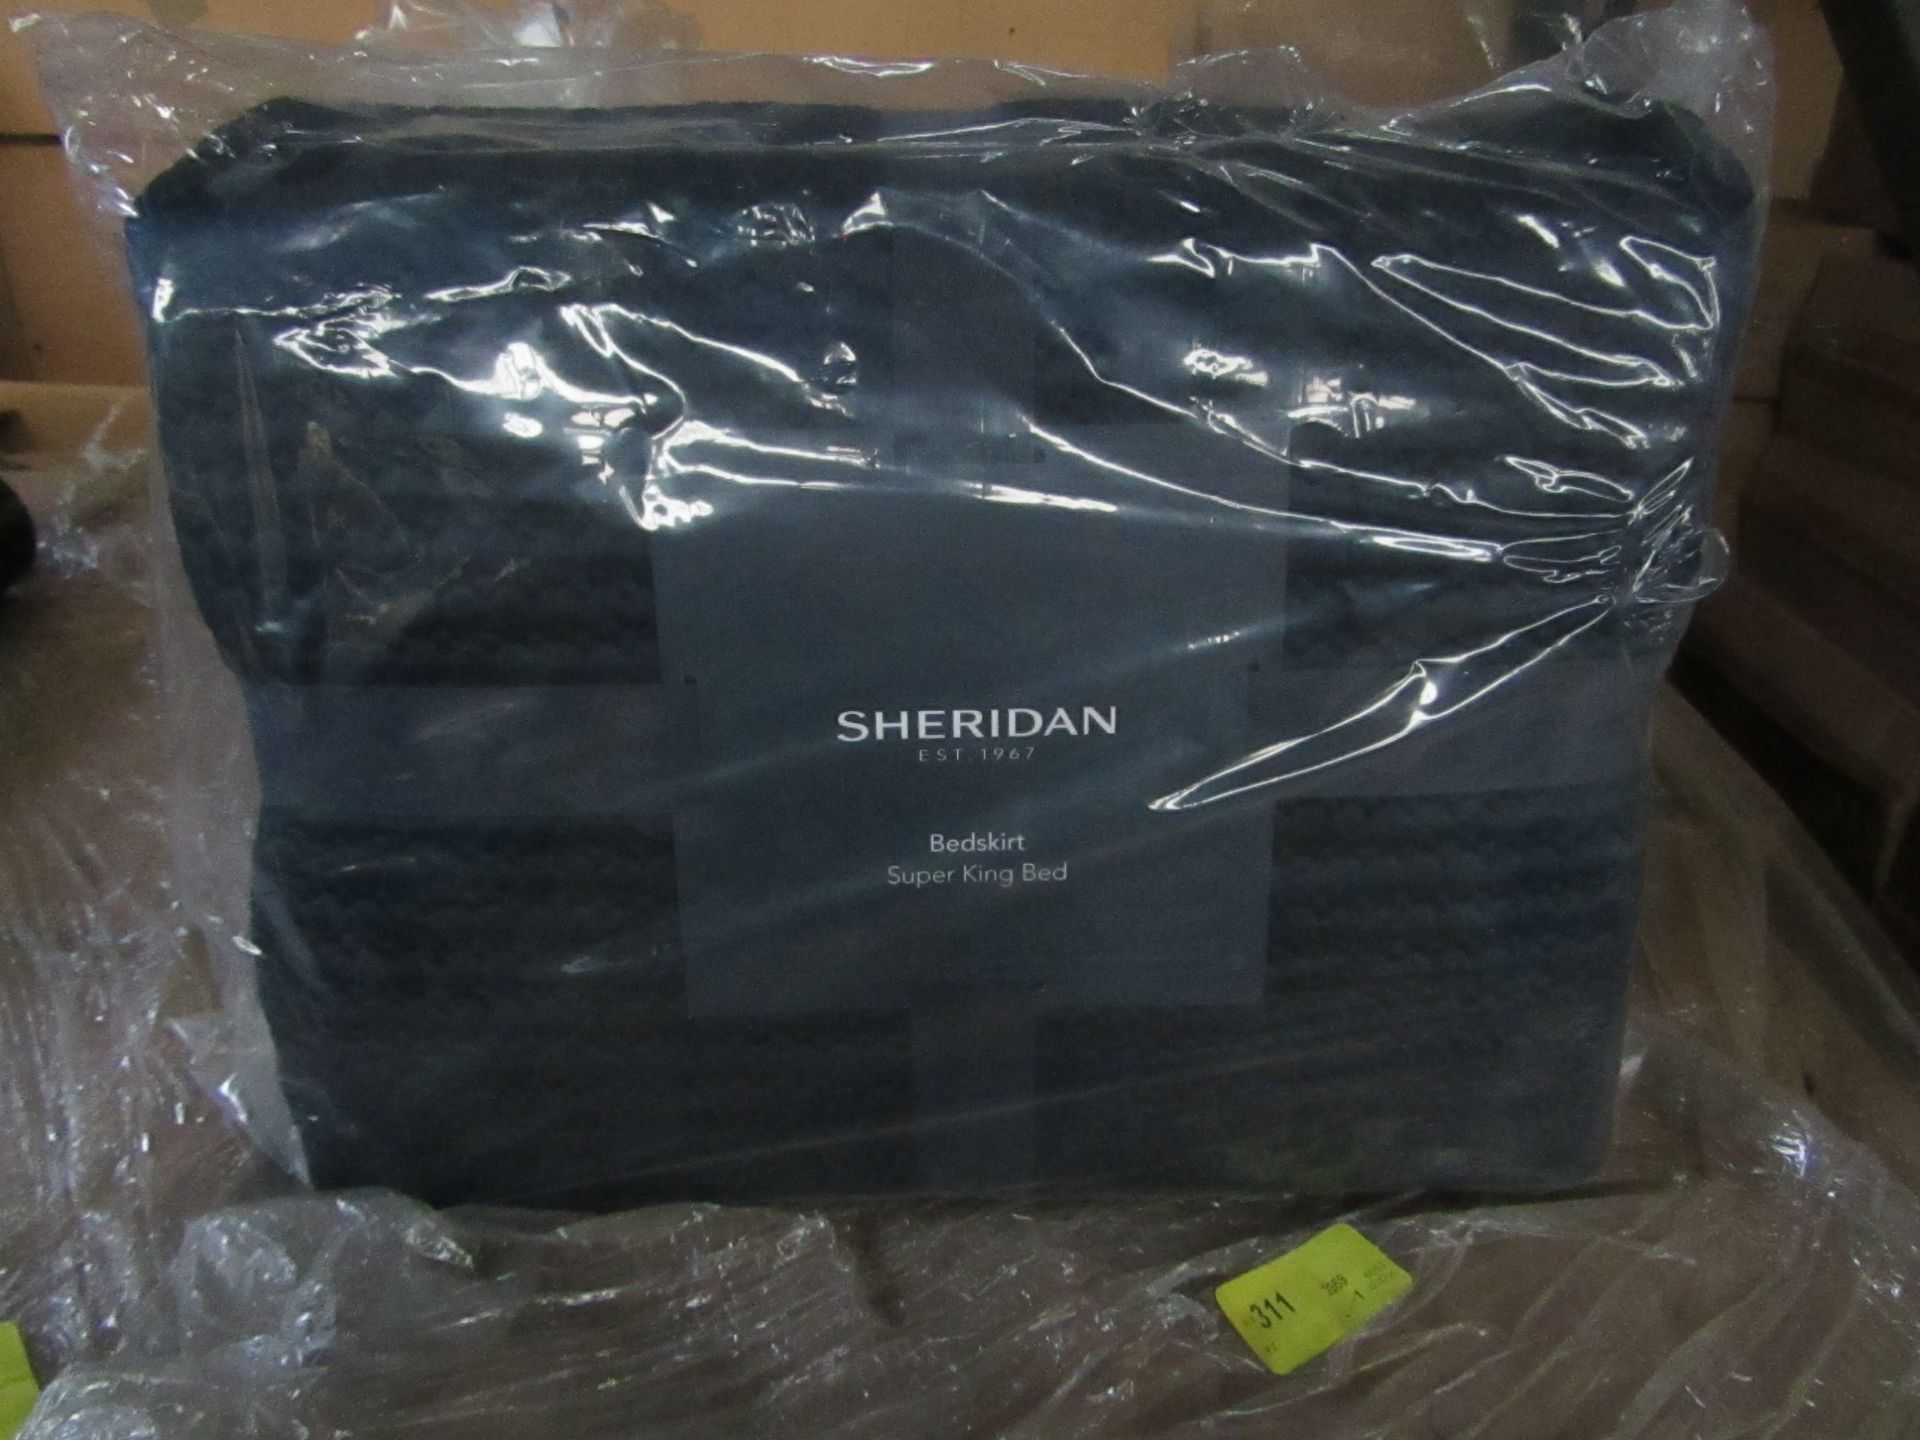 3x Sheridan - Midnight Super King Sized Bed Skirt - New & Packaged. RRP œ75.